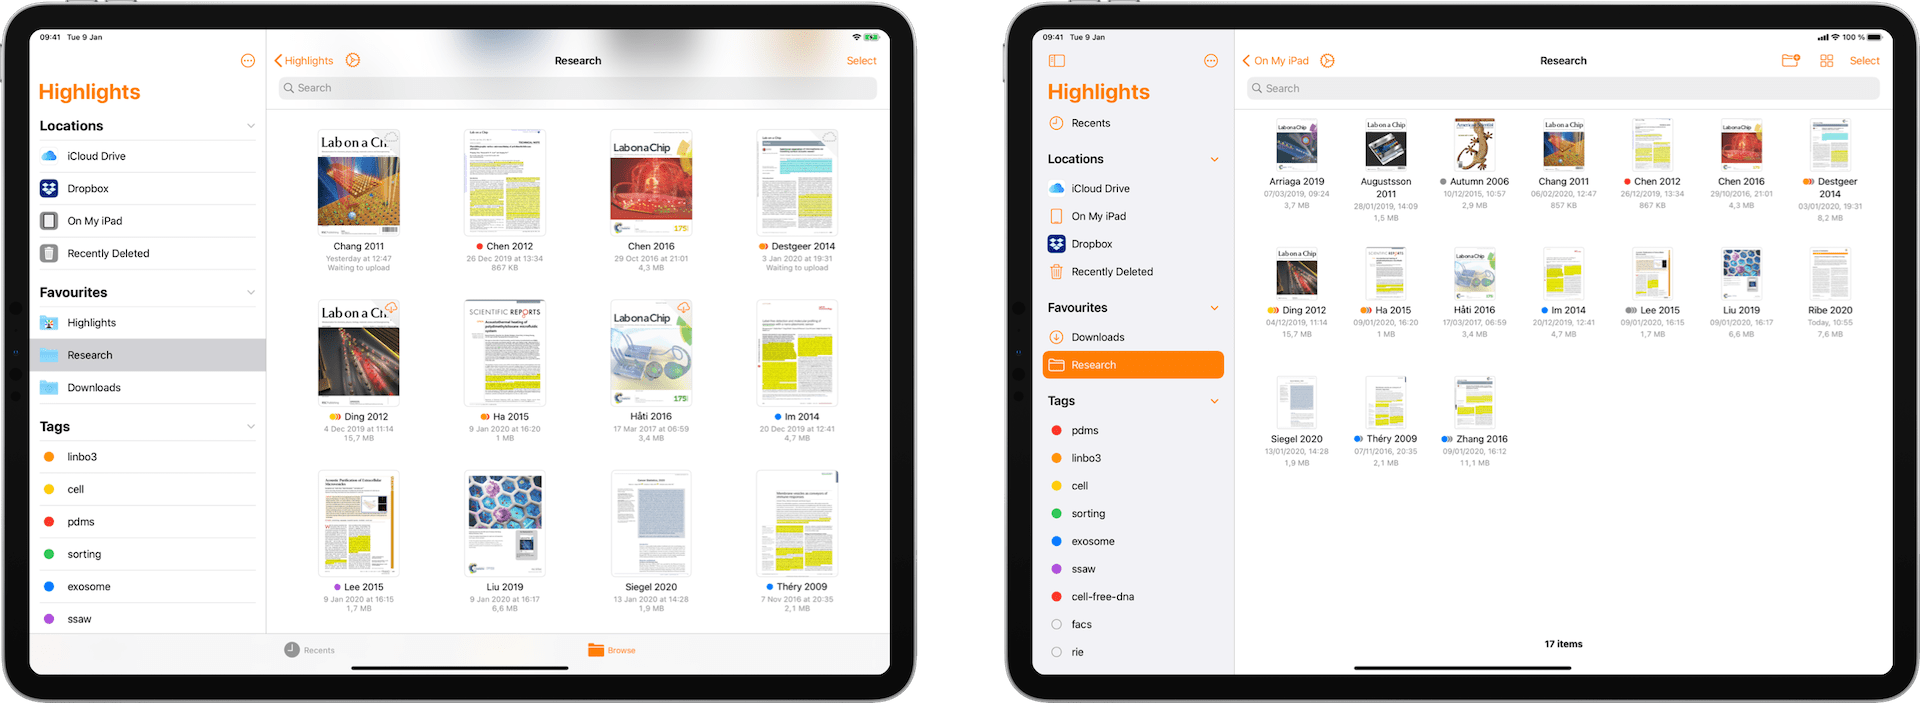 Comparison of the document browser in iPadOS 13 on the left and iPadOS 14 on the right.